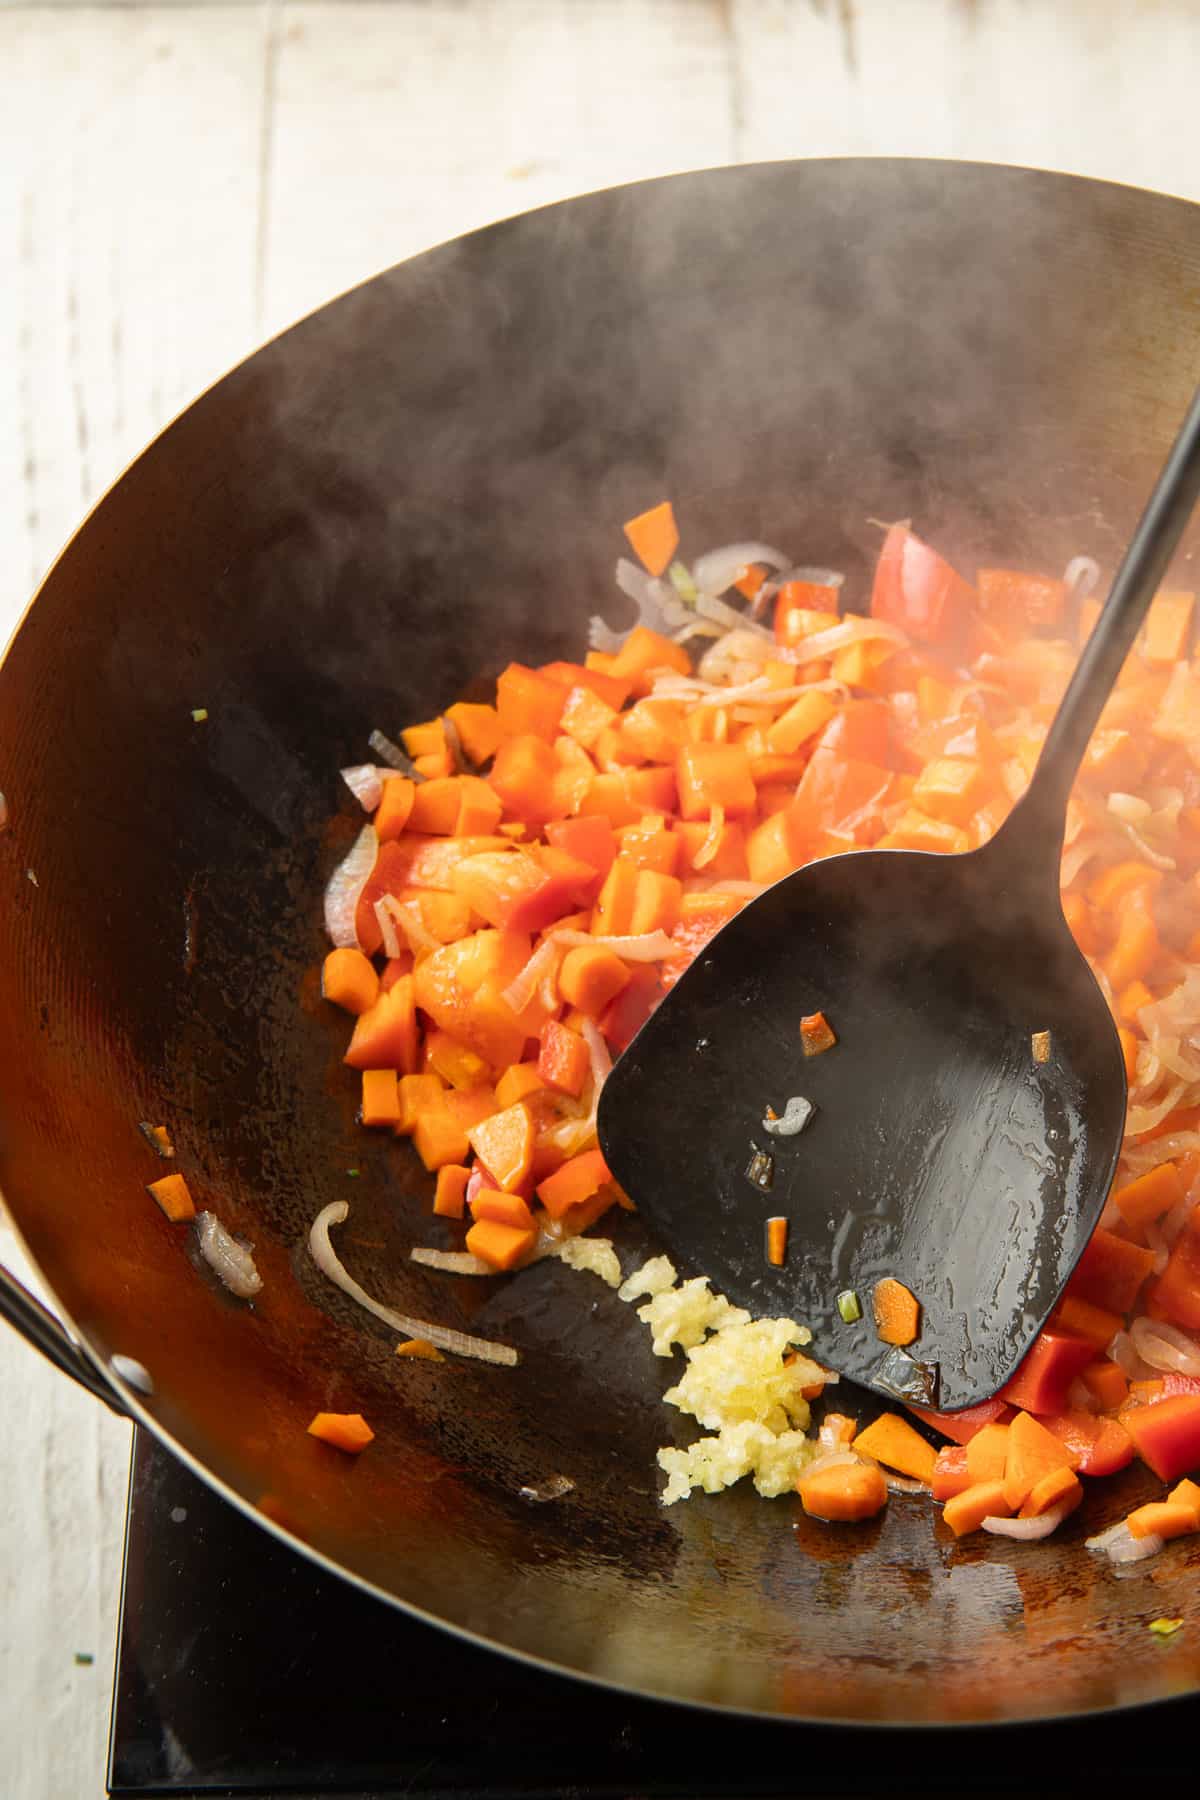 Minced cooking in a wok with stir-fried peppers and carrots.